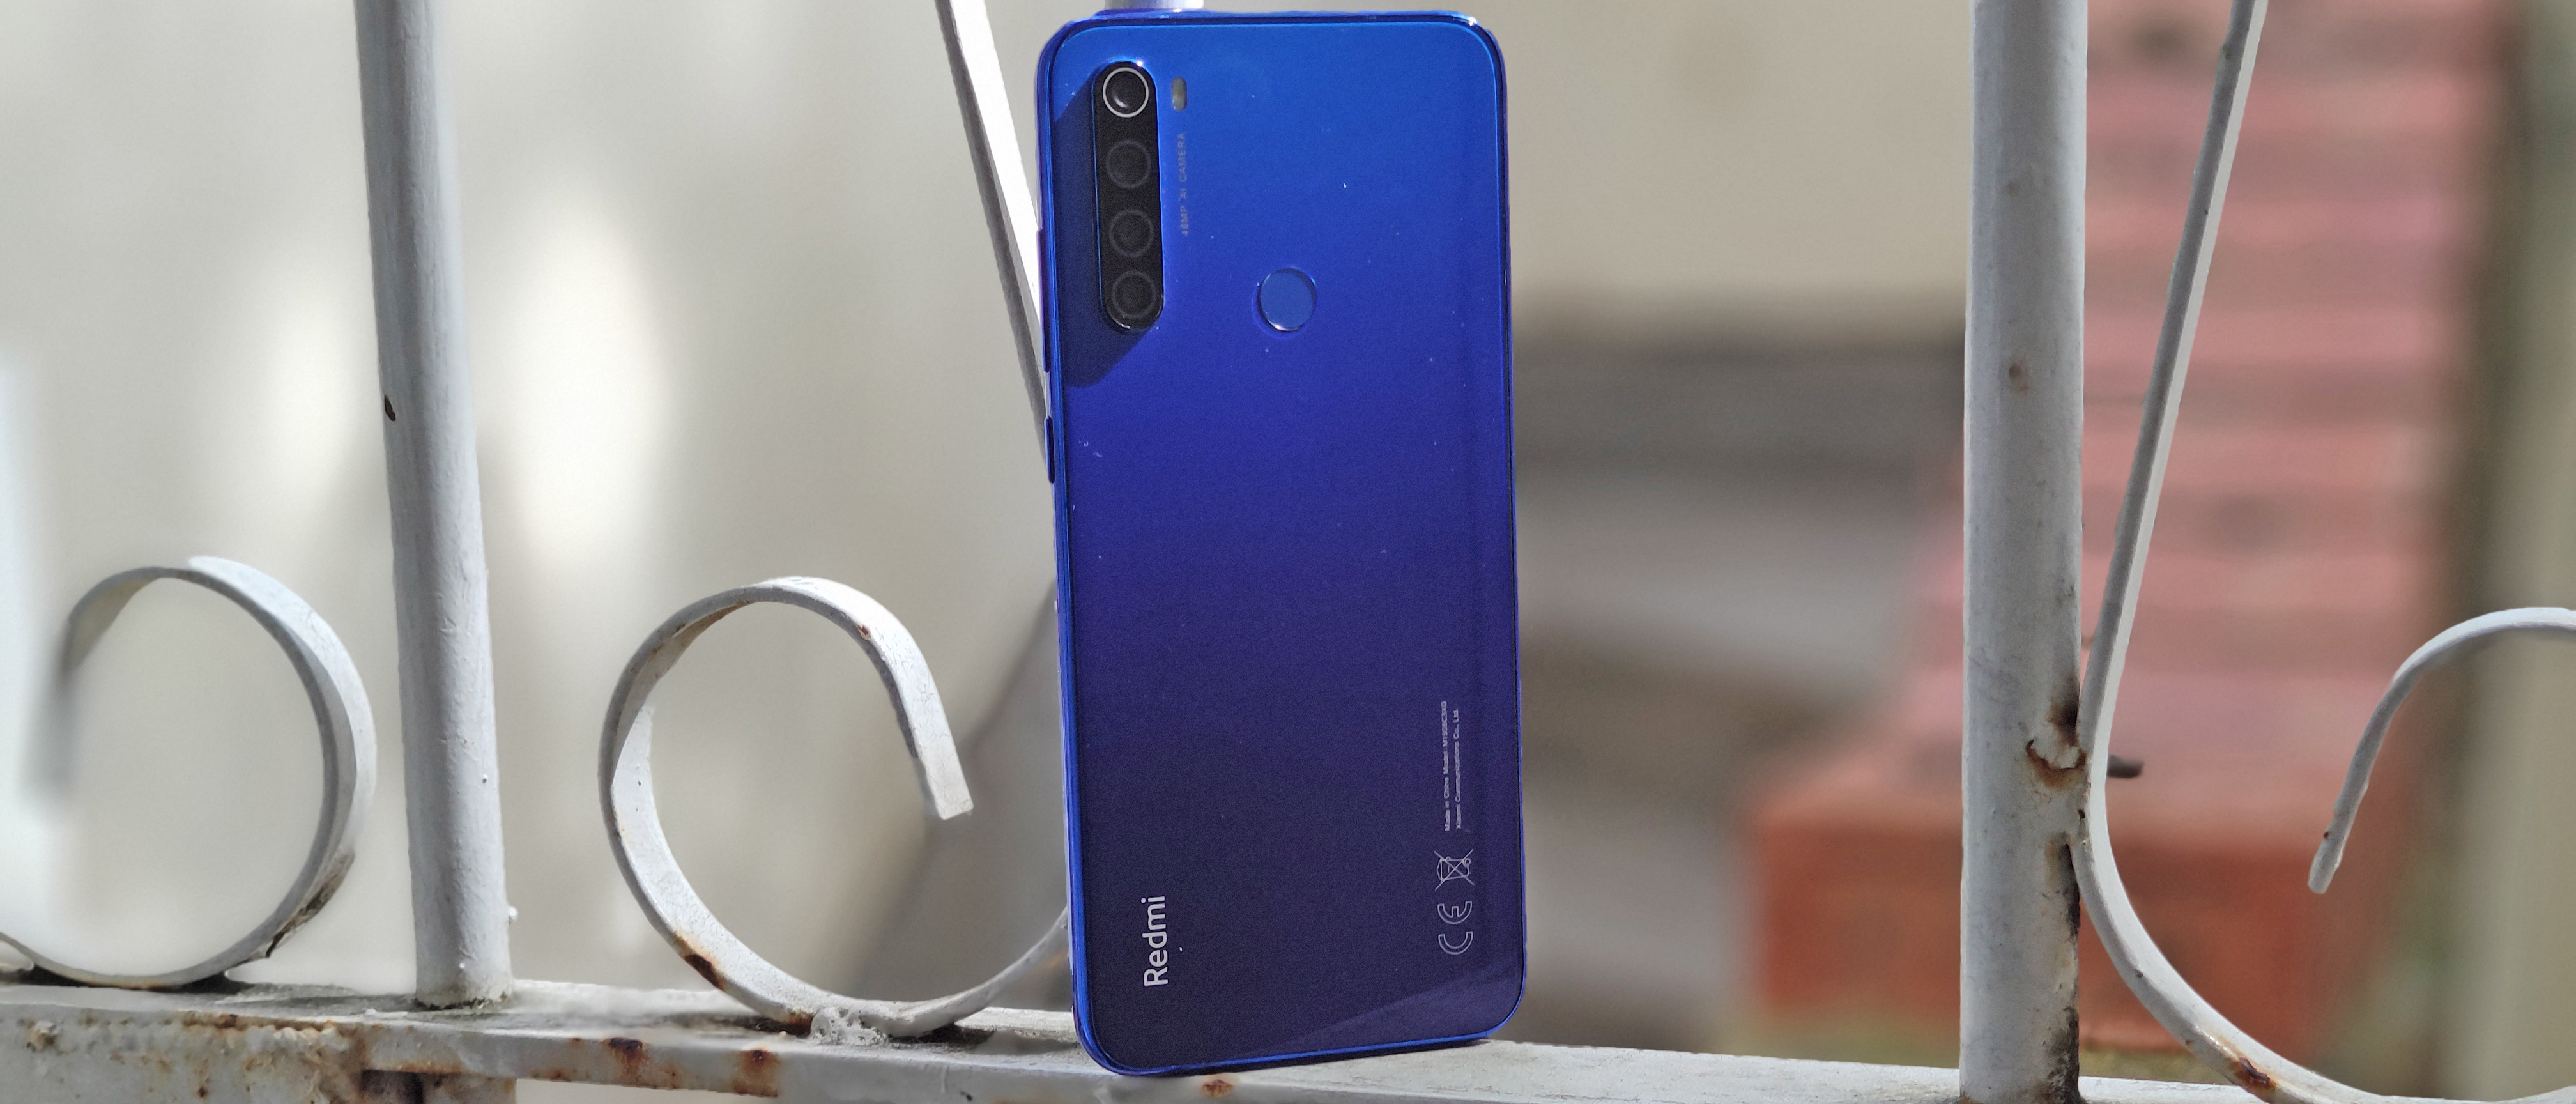 Redmi Note 8 Pro review: Xiaomi's best Note with note-worthy upgrades